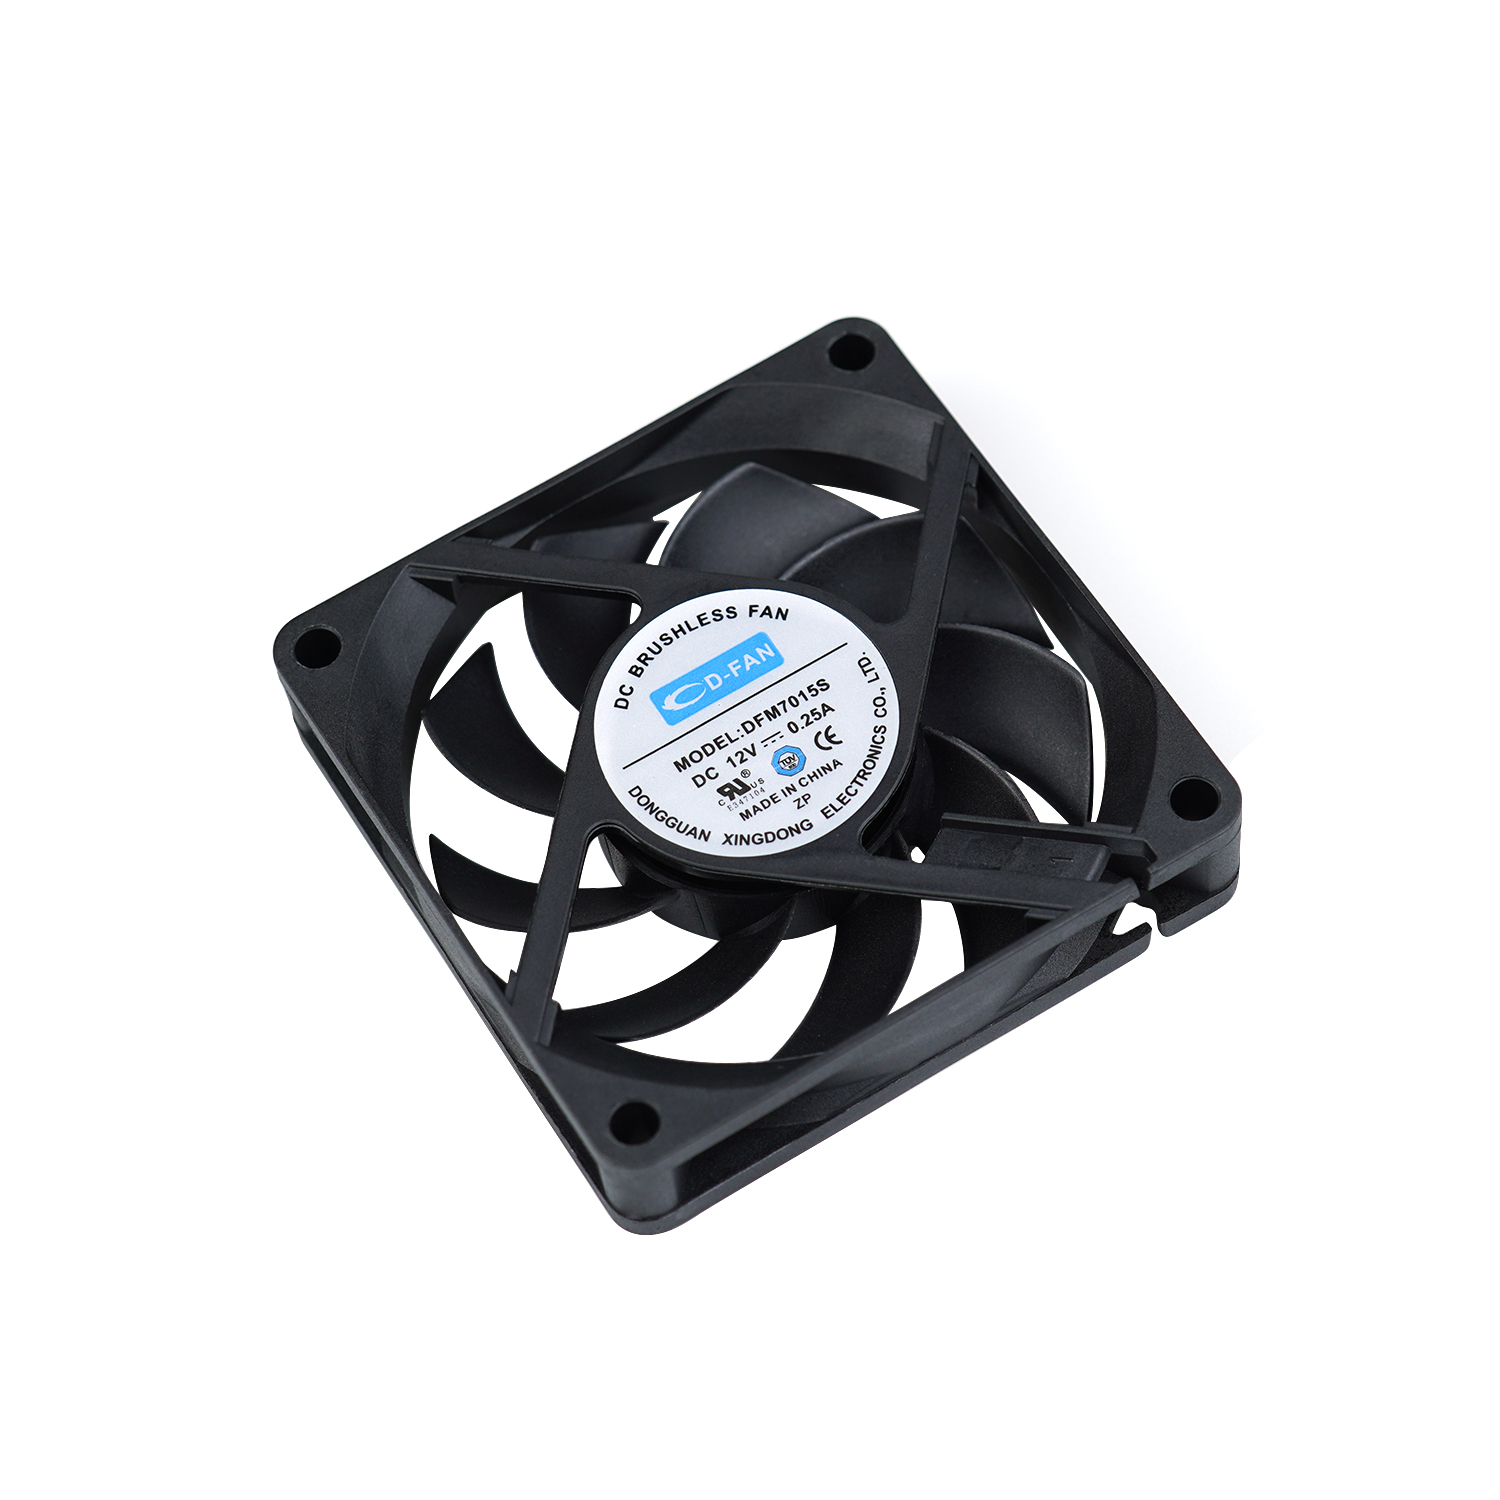 Silent DC Axial Fan 24v 70x70x15mm for refrigerator